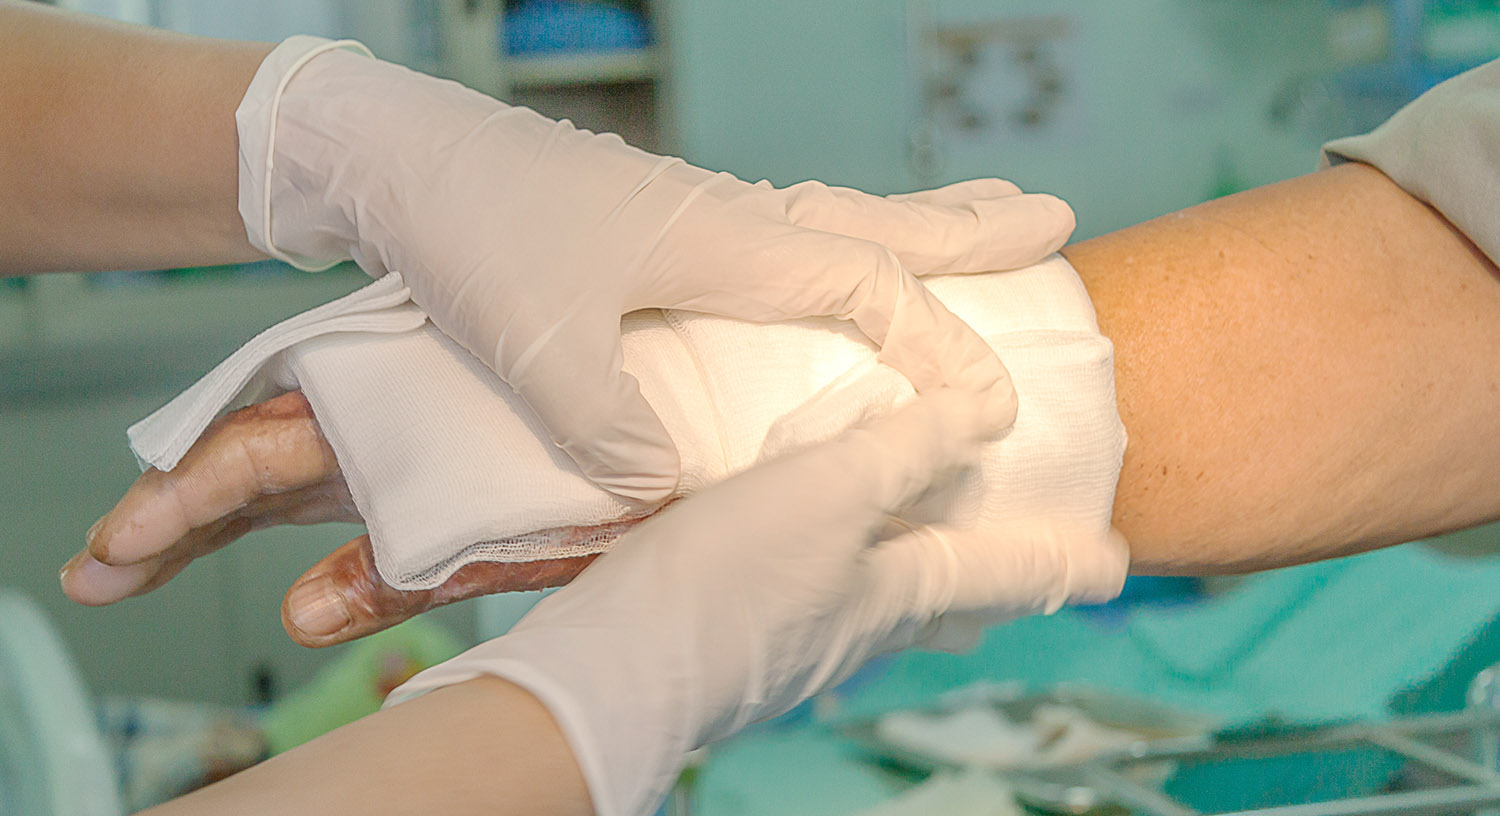 How to Know if You’re at Risk for Post-Surgical Wound Complications